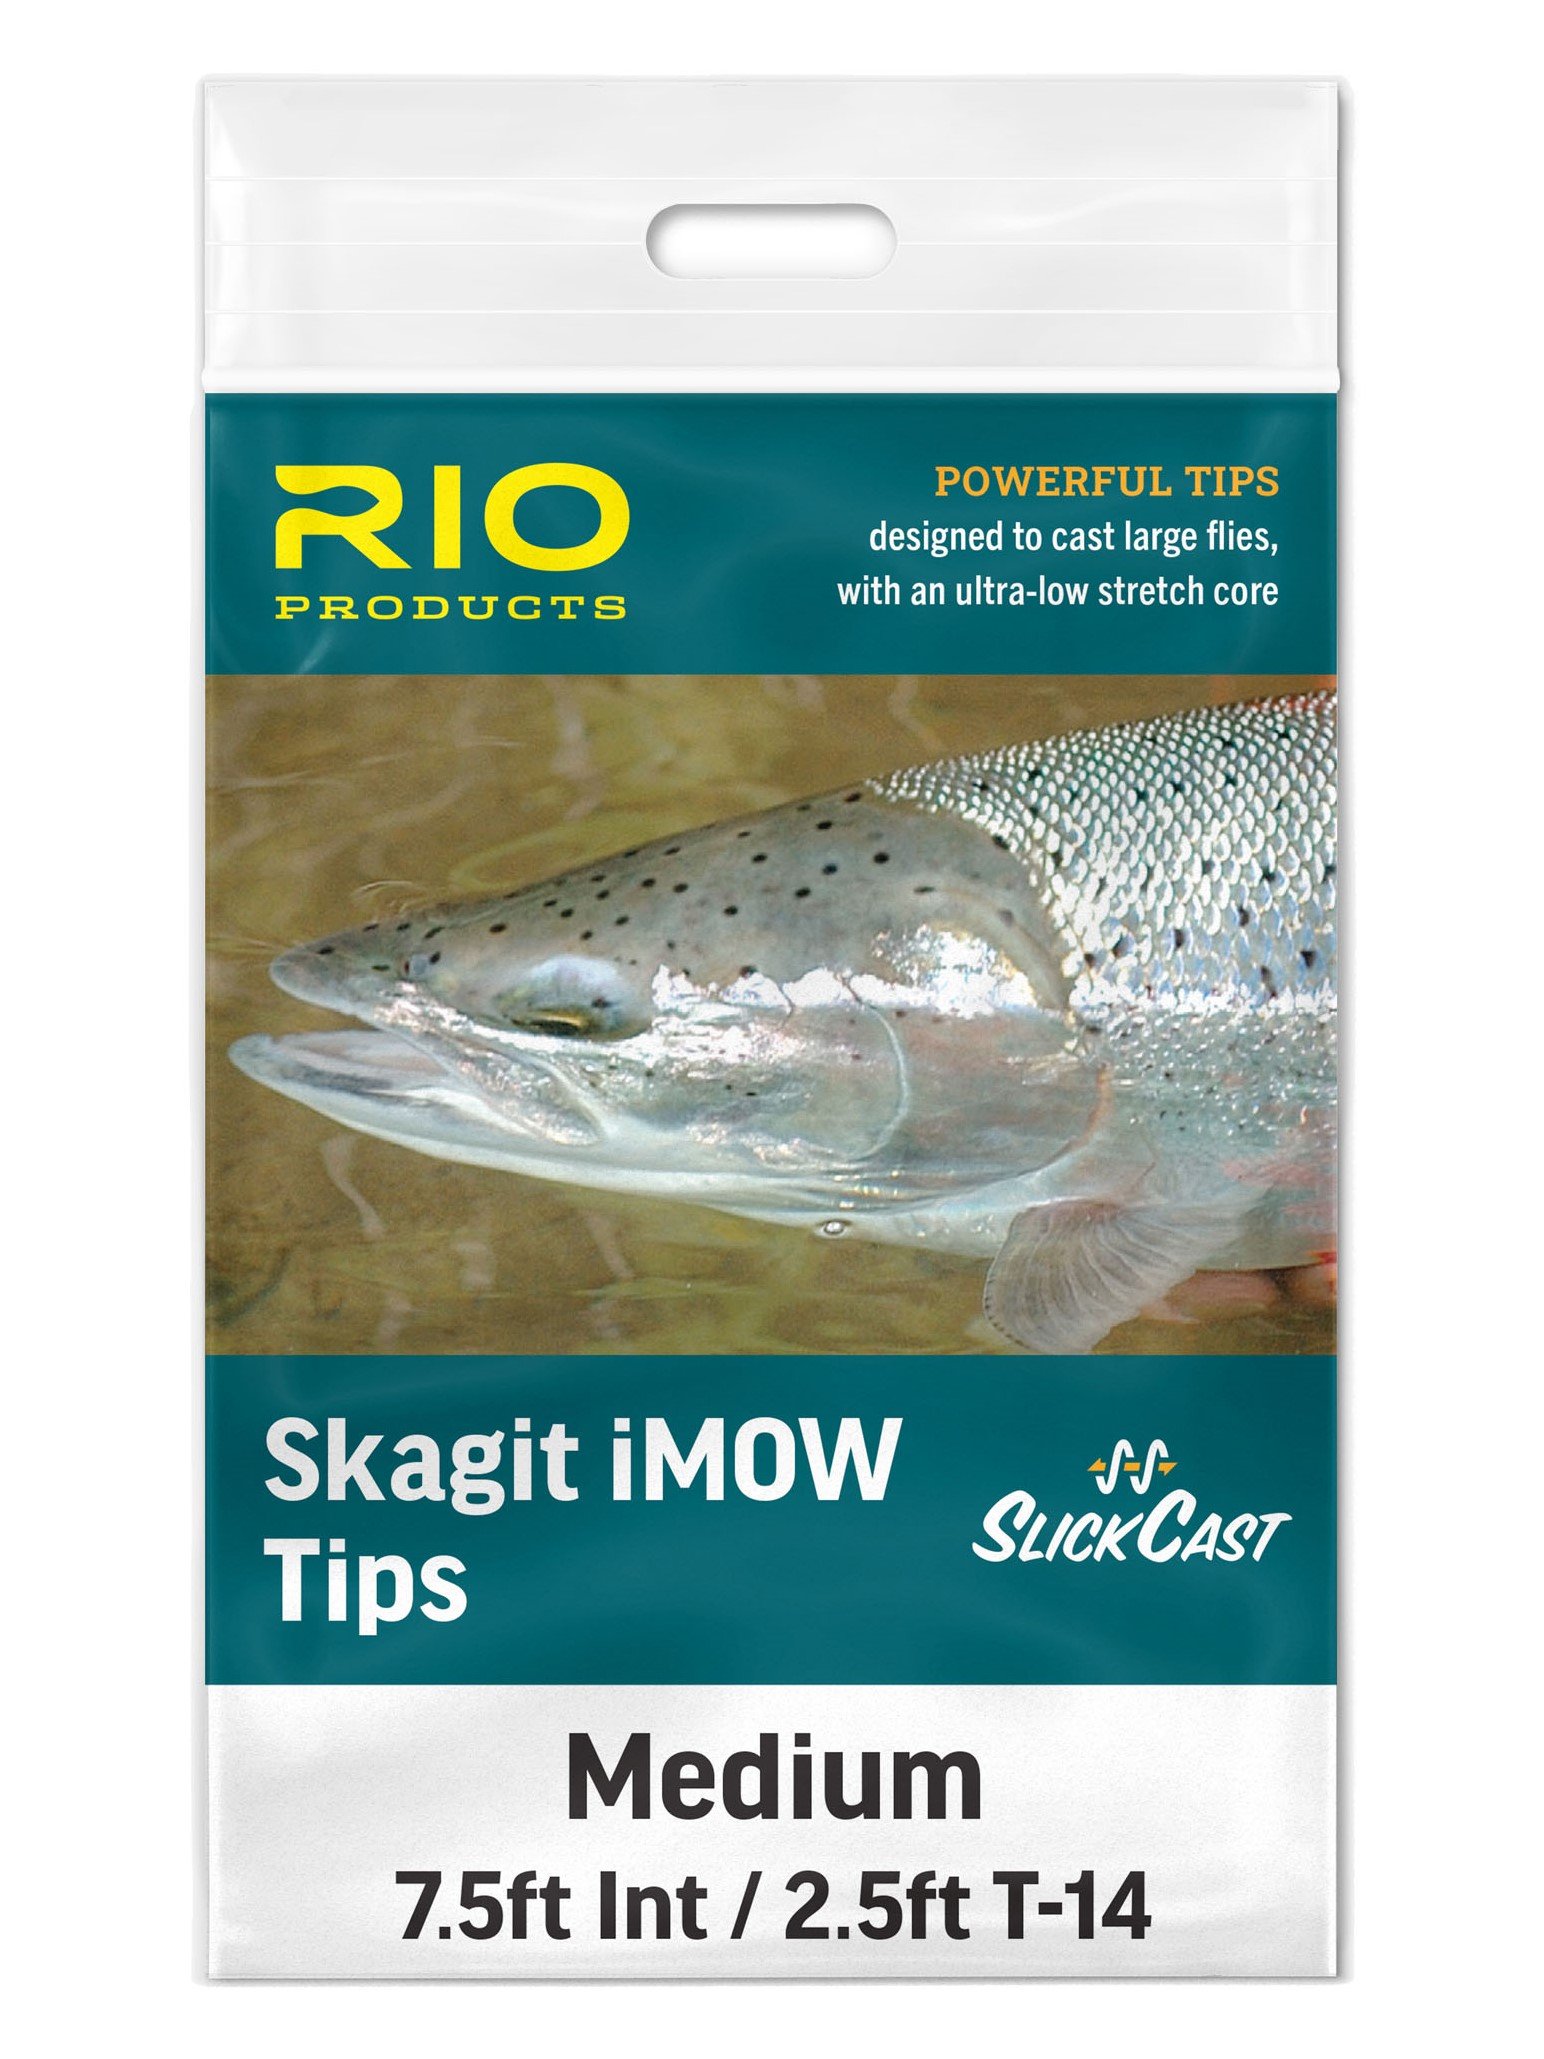 6-7 IPS COMES WITH 4 TIPS IN T-8 RIO NEW INTOUCH SKAGIT iMOW LIGHT TIPS KIT 